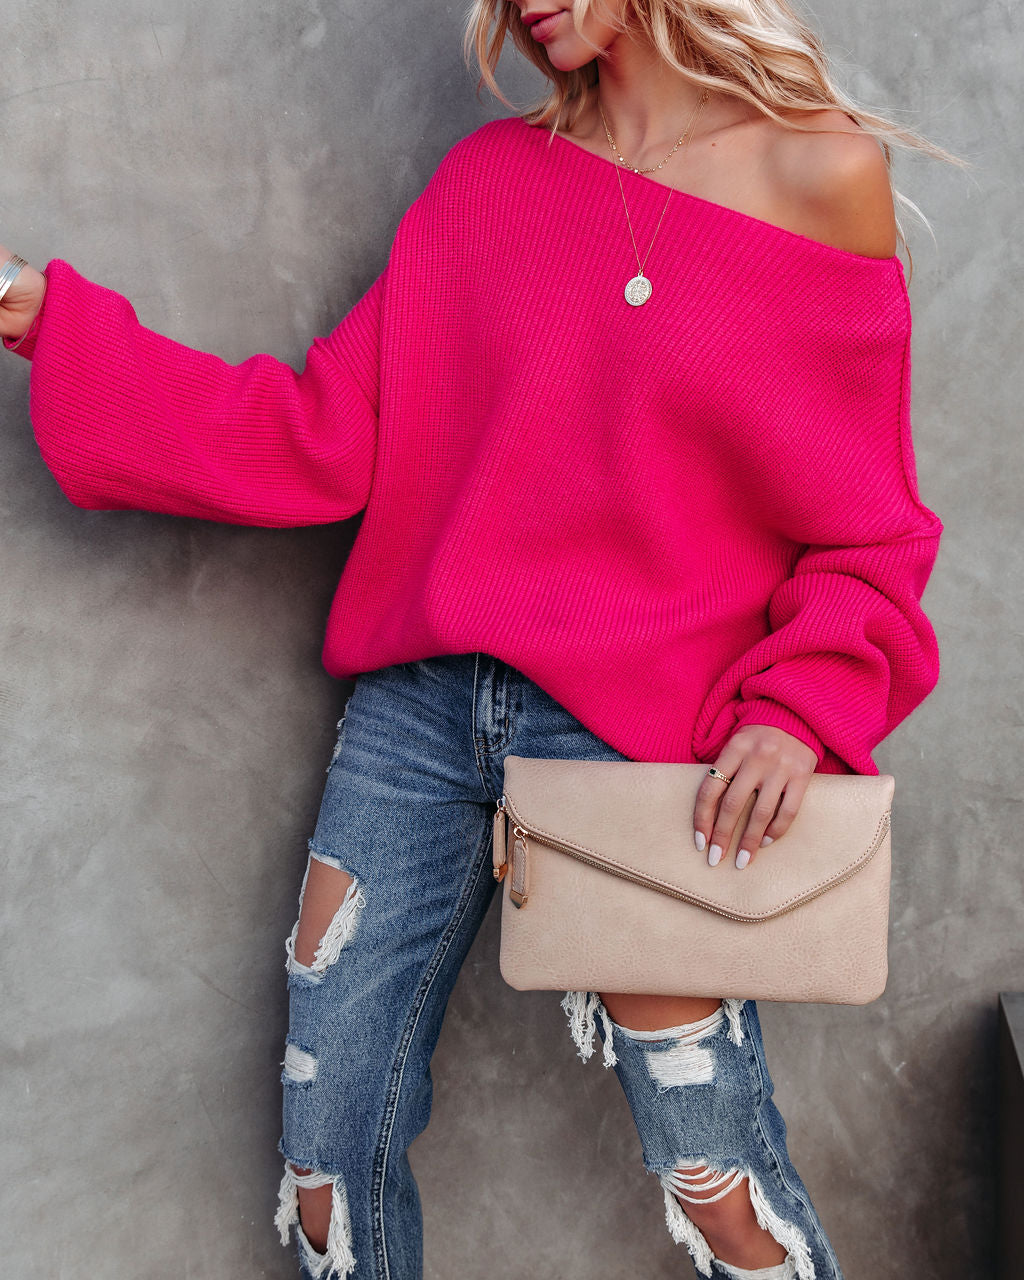 Claus For Celebration Boat Neck Sweater - Hot Pink